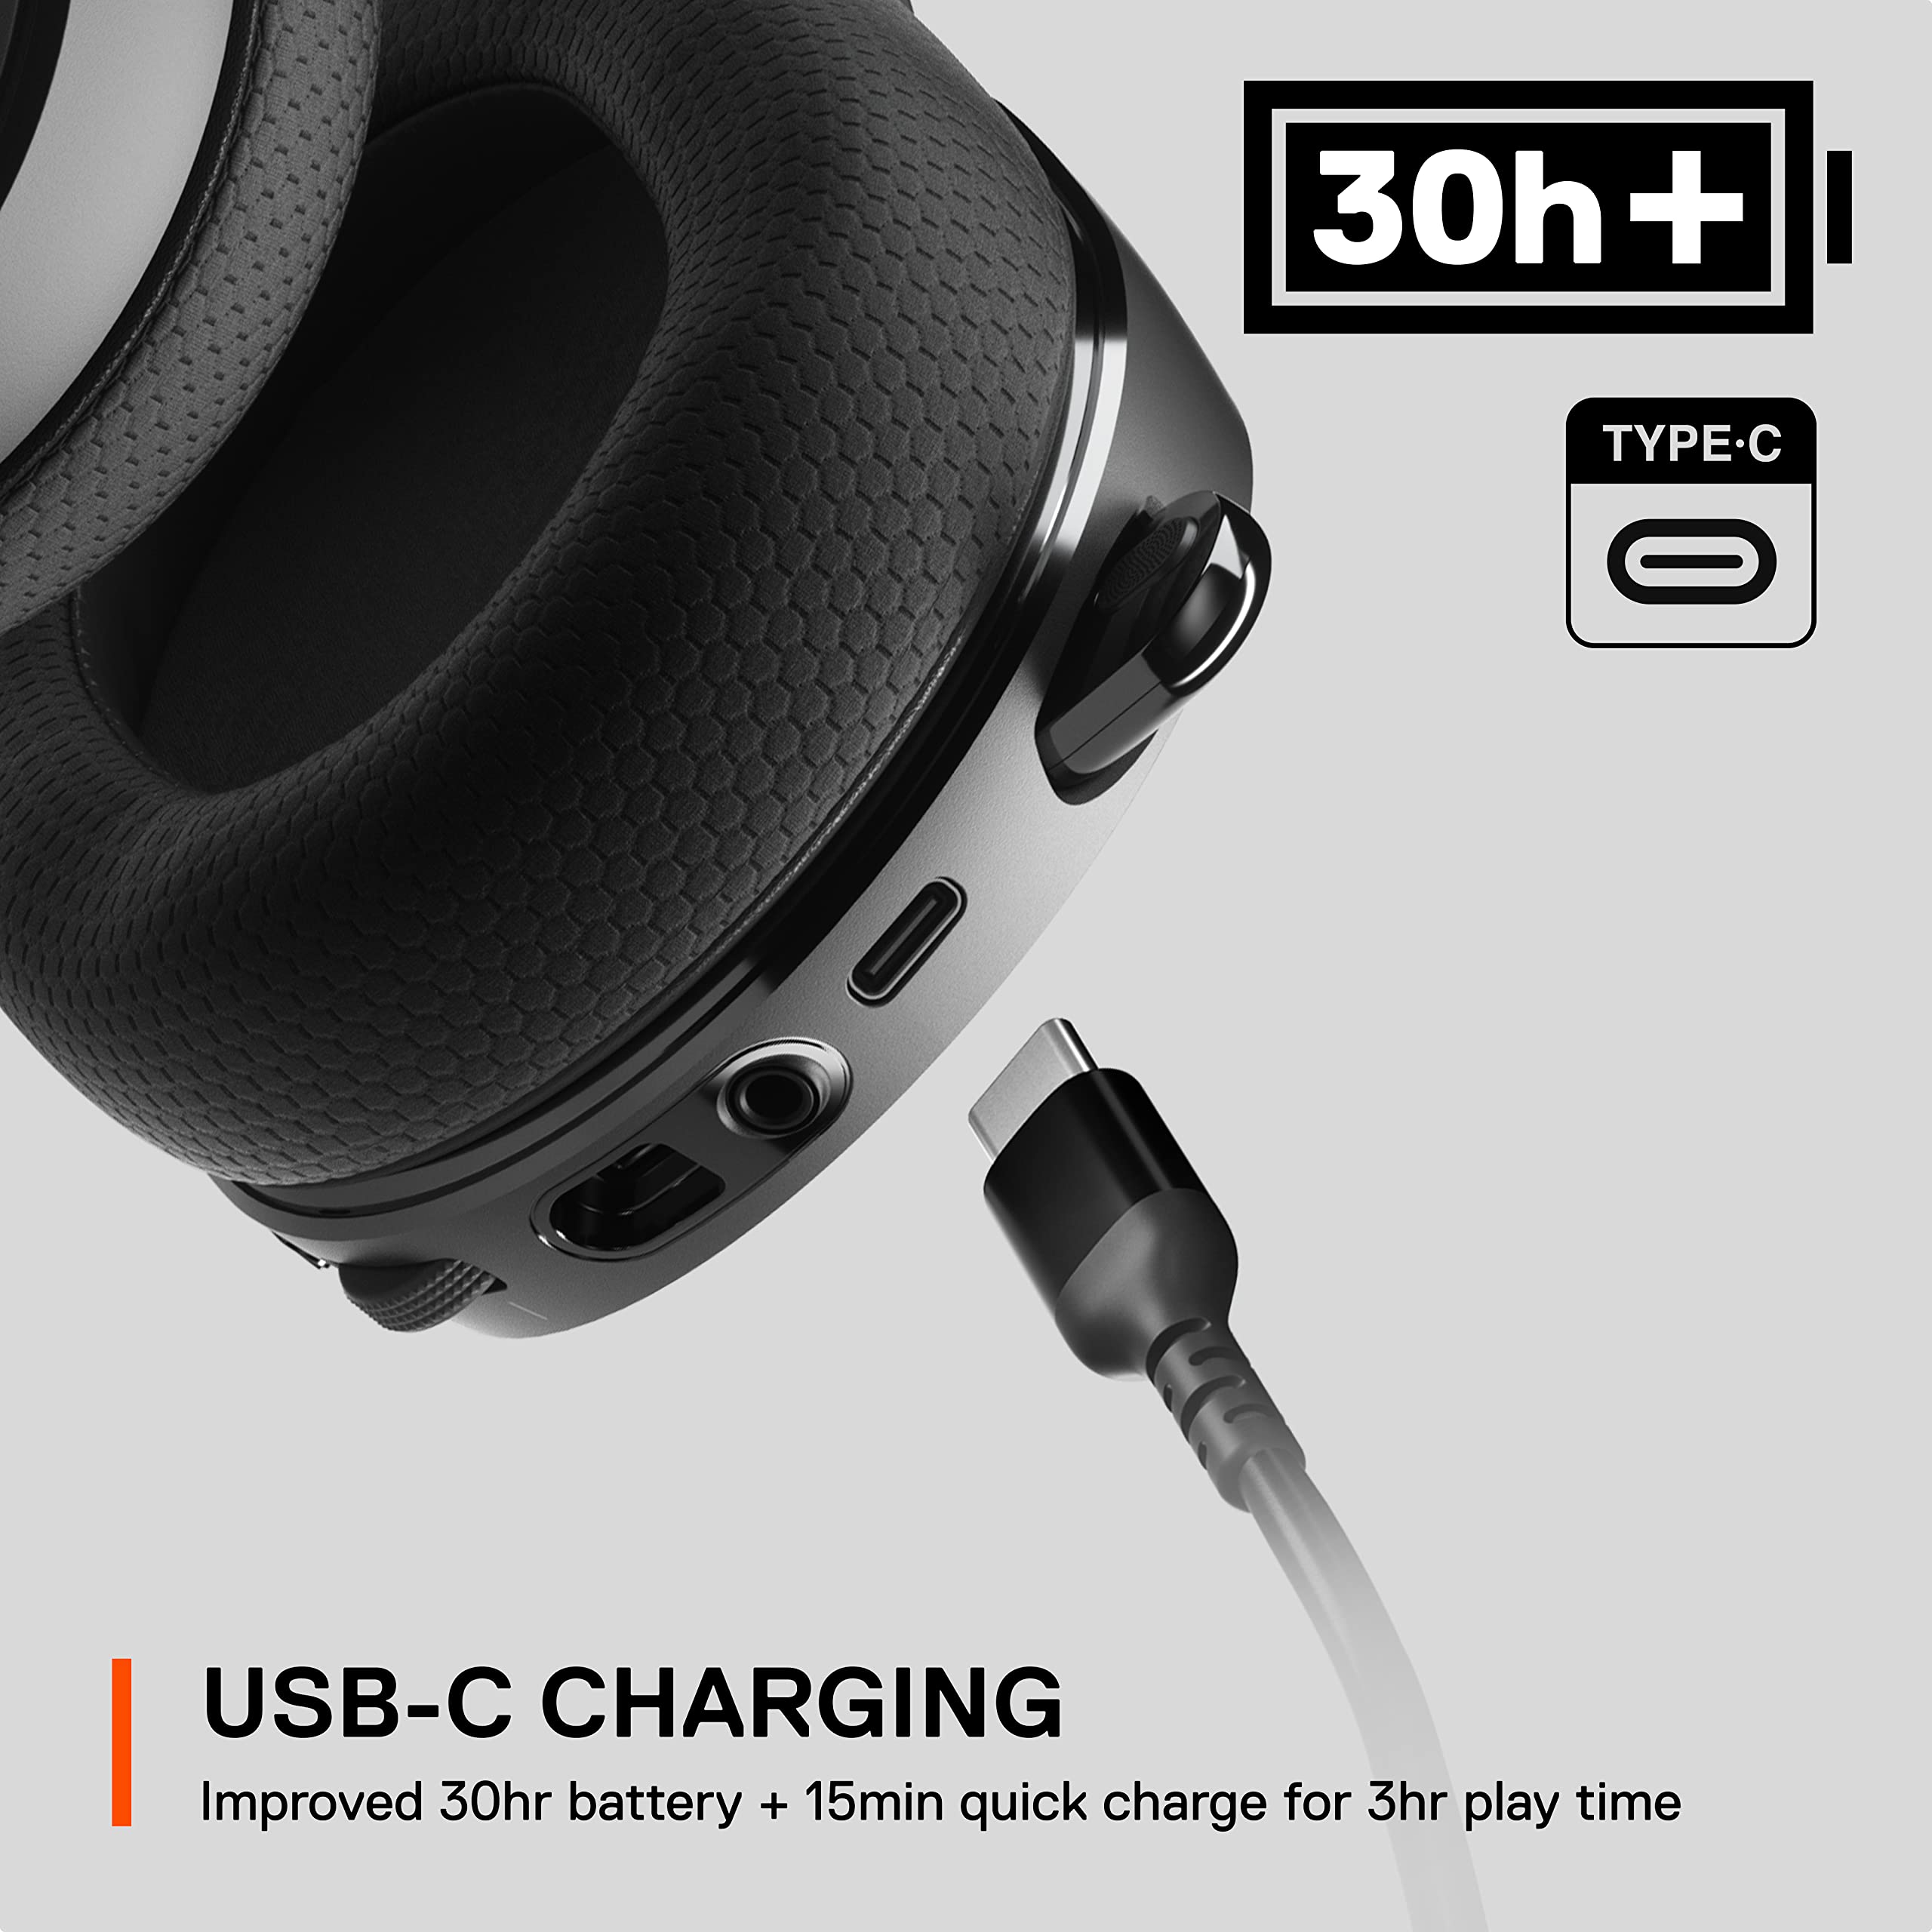 SteelSeries Arctis 7+ Wireless Gaming Headset – Lossless 2.4 GHz – 30 Hour Battery Life – USB-C – 7.1 Surround – For PC, PS5, PS4, Mac, Android and Switch - Black